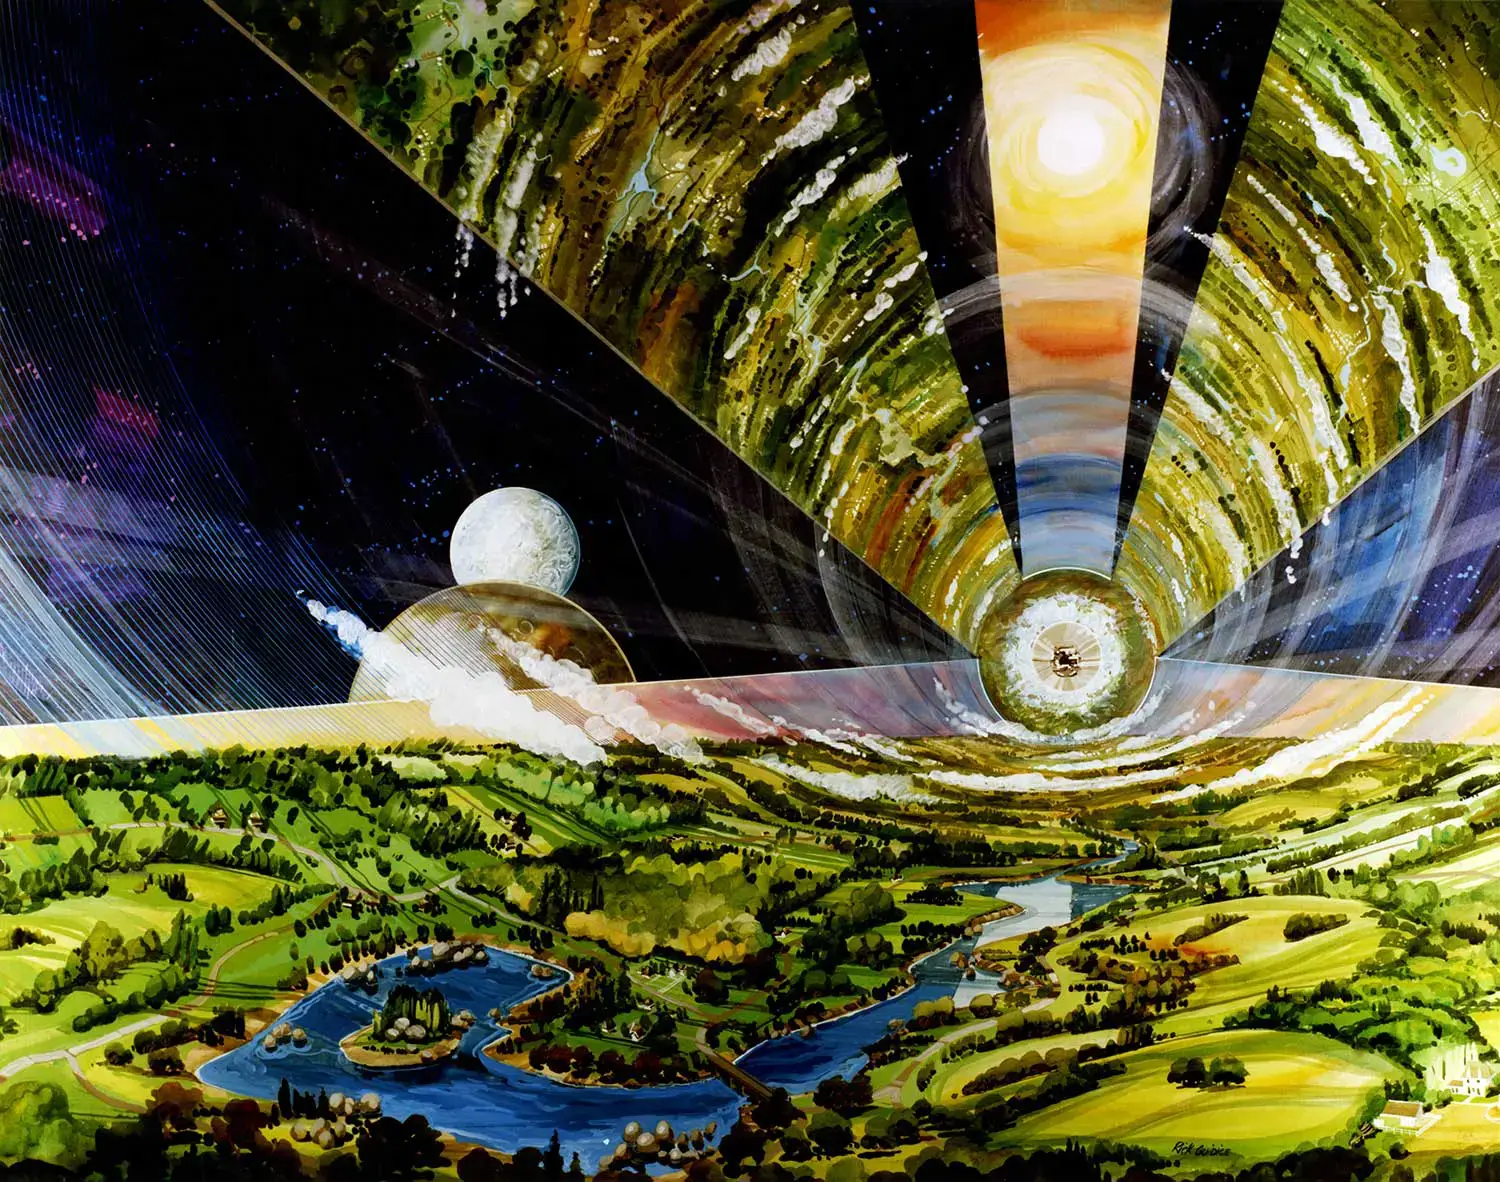 An interior view of a space colony shows river, forest, and countryside wrapped around a cylinder form and vanishing into the distance. In gaps between the “ground” one can see a distant planet and moon.